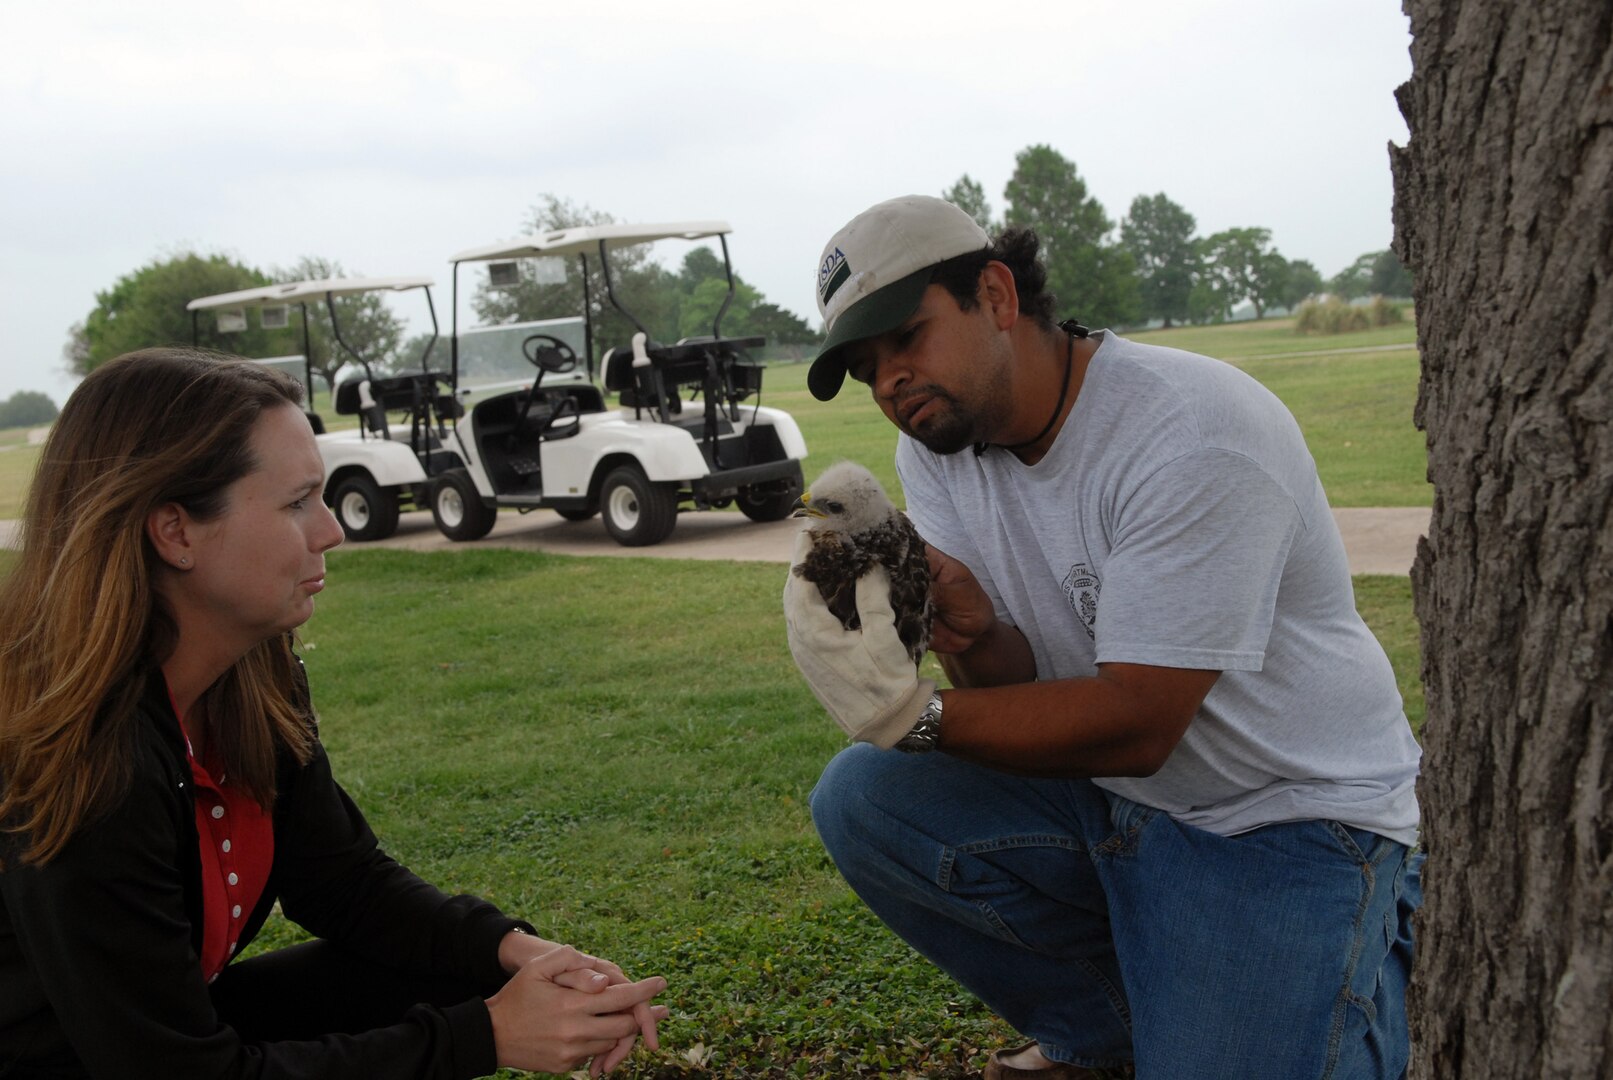 Verna Cyr, a 12th Mission Support Group Environmental Flight natural resource manager, observes Michael Pacheco, a 12th Flying Training Wing Safety, U.S. Department of Agriculture wildlife biologist, as he inspects a young Red Shouldered hawk after a grounds worker at the golf course reported finding it here Tuesday. The two coordinated with a local bird rehabilitation facility, who recommended replacing the hawk in its nest to allow the parents to rehabilitate it. The pair will perform a 24-hour follow up to ensure the bird remained in the nest. (U.S. Air Force photo by Rich McFadden)